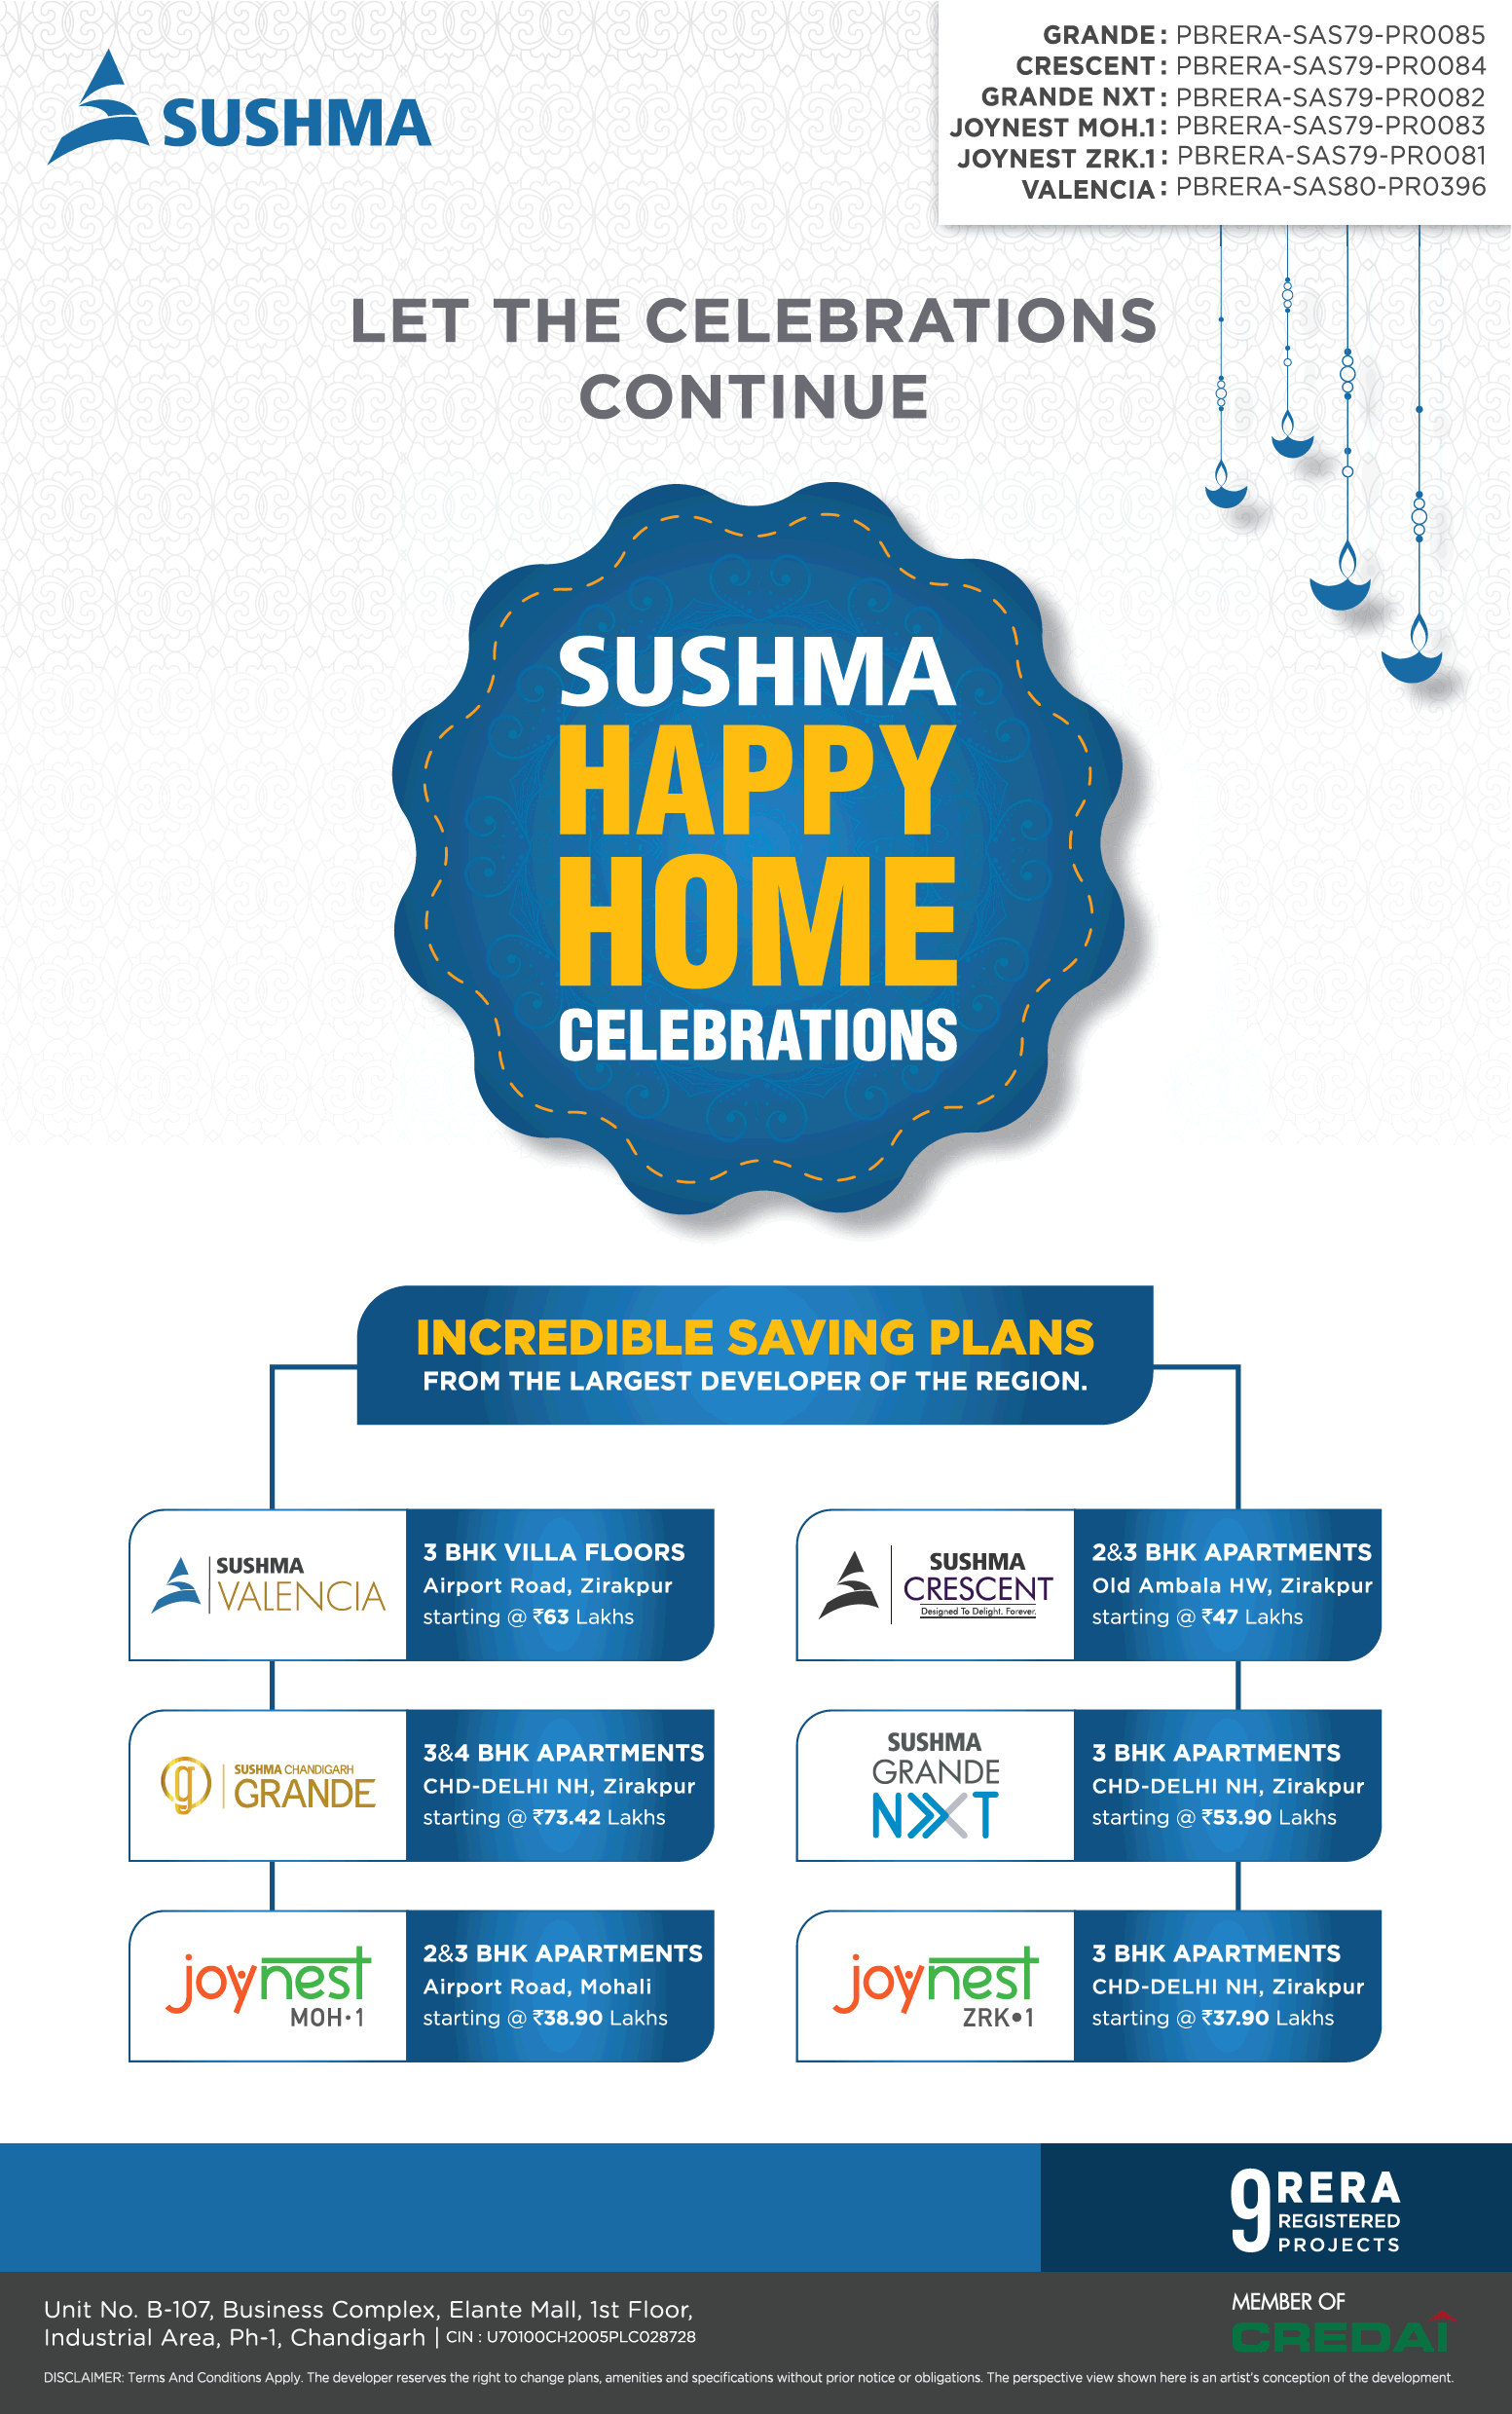 Let the celebrations continue at Sushma Buildtech in Chandigarh